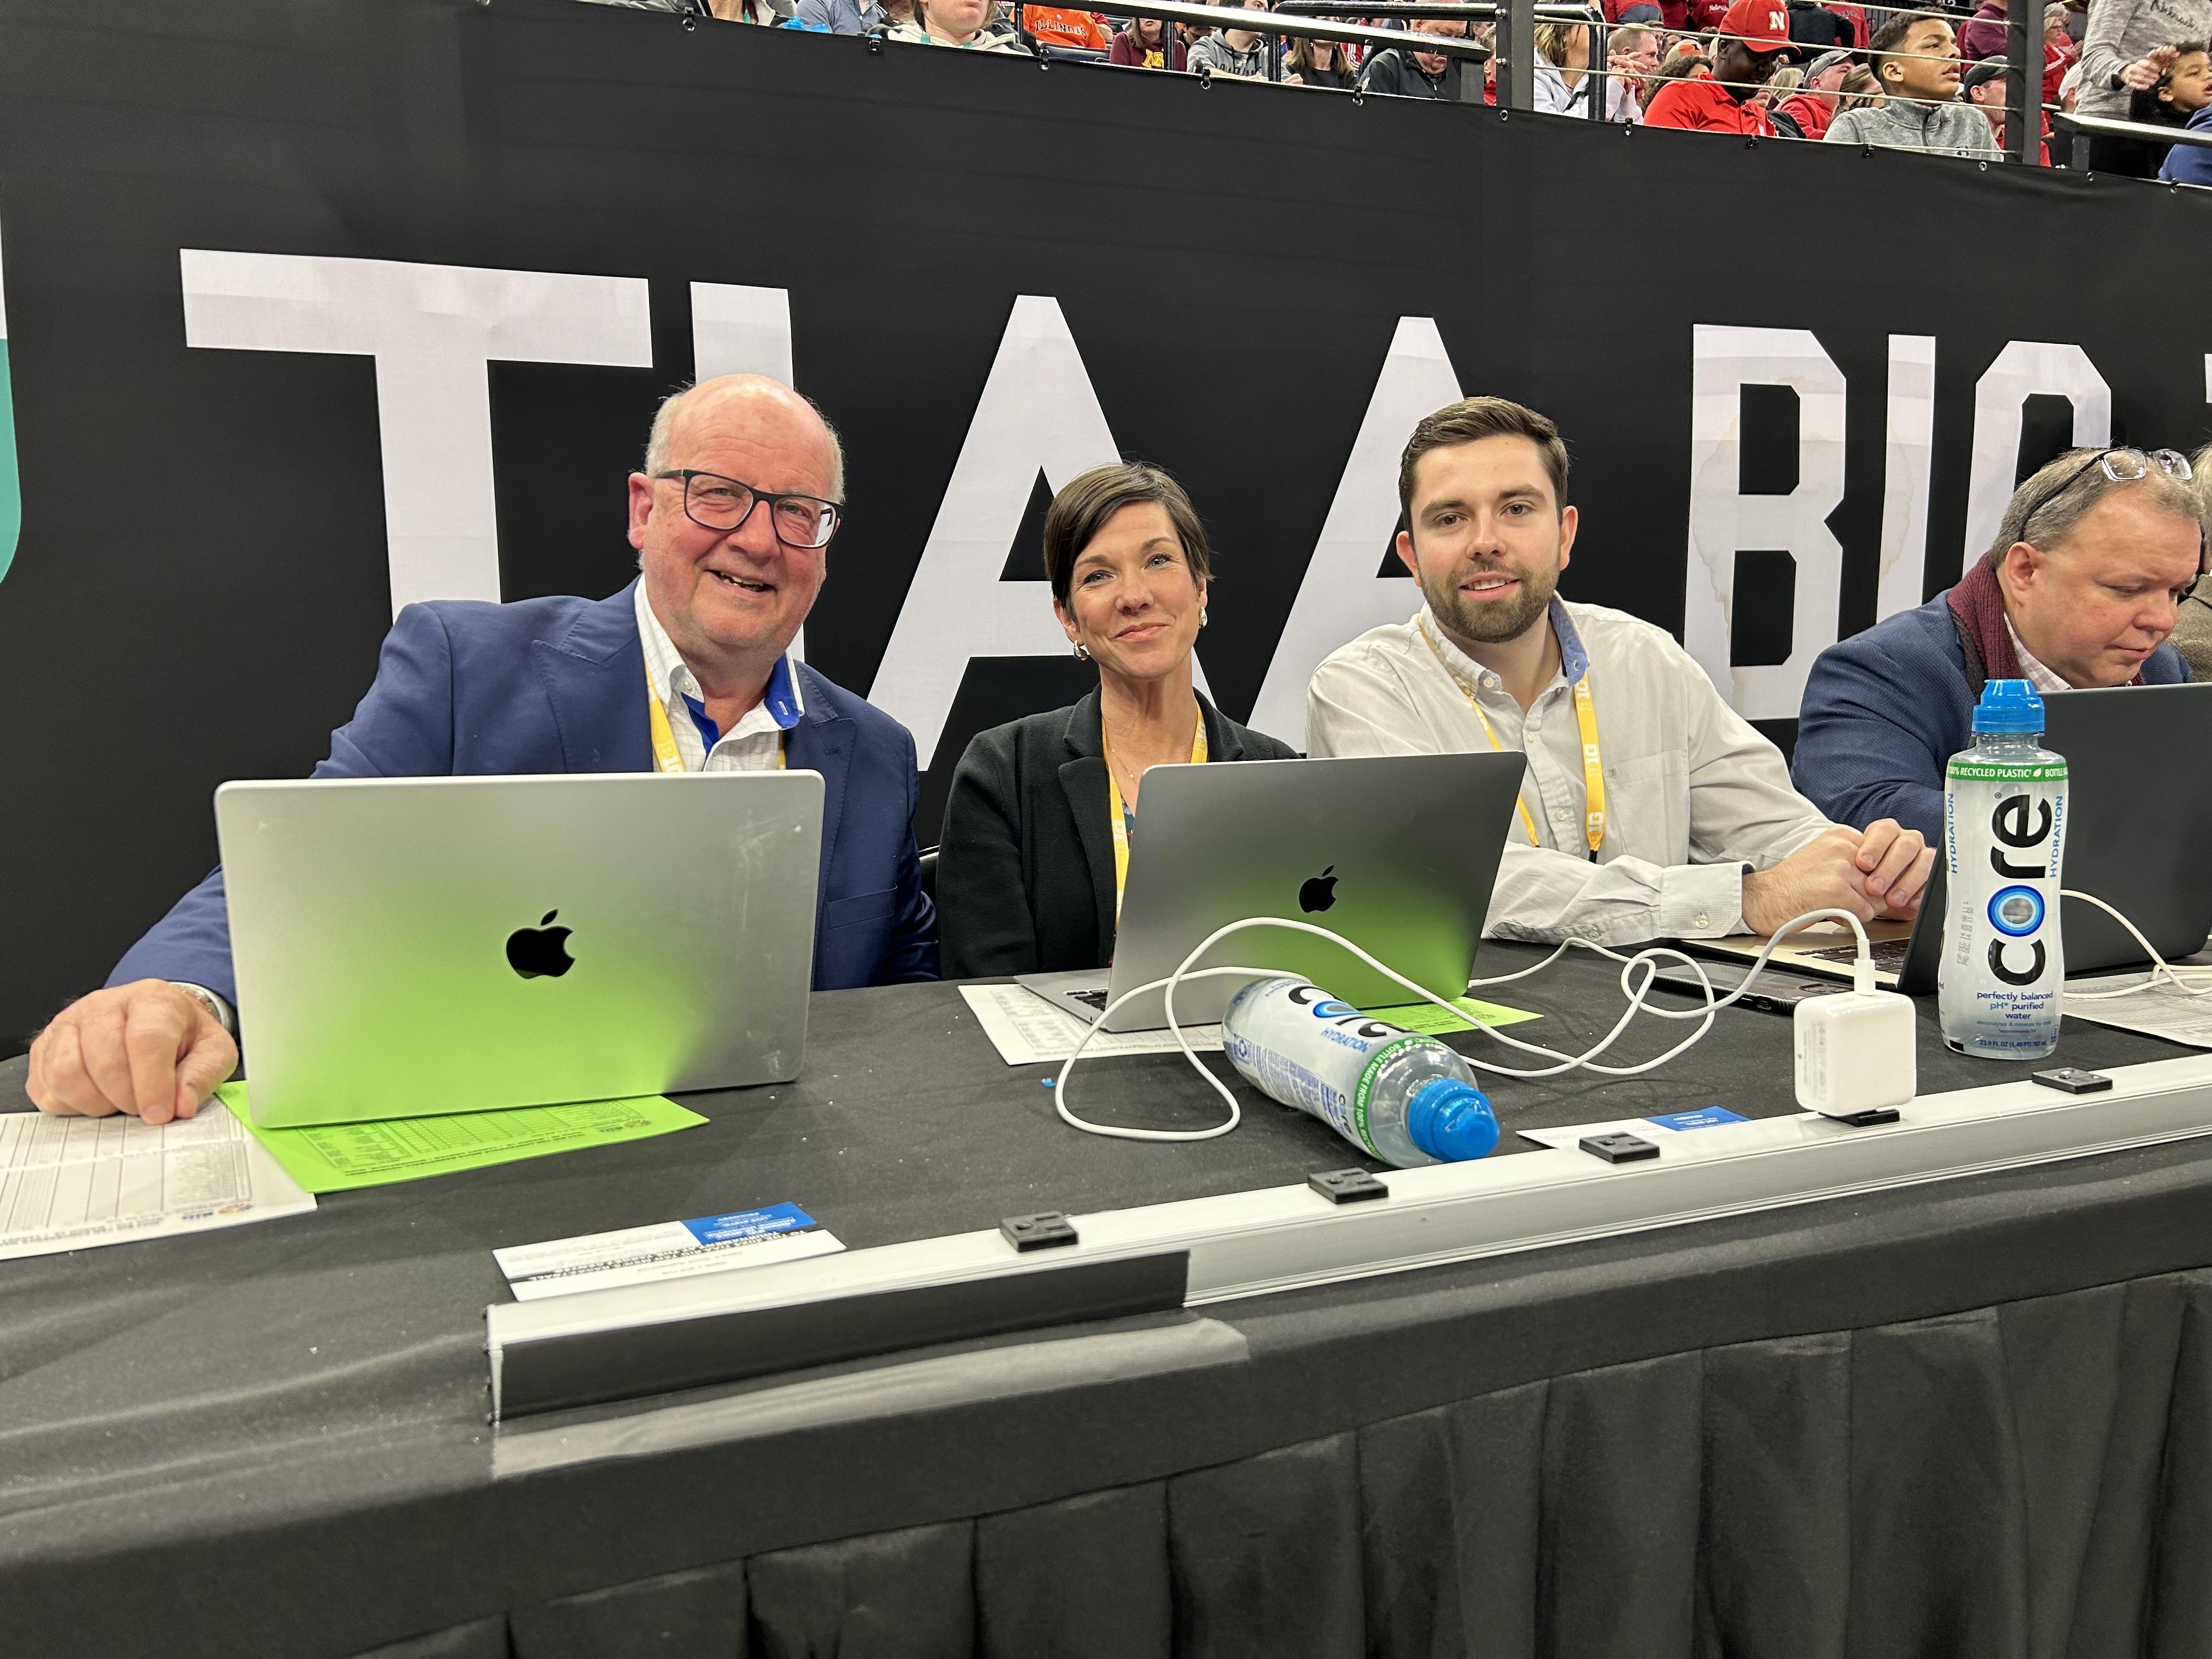 The HoosiersNow.com team on press row at the Big Ten Tournament, publisher Tom Brew (left), marketing and social media director Becky Rigel and basketball reporter Jack Ankony